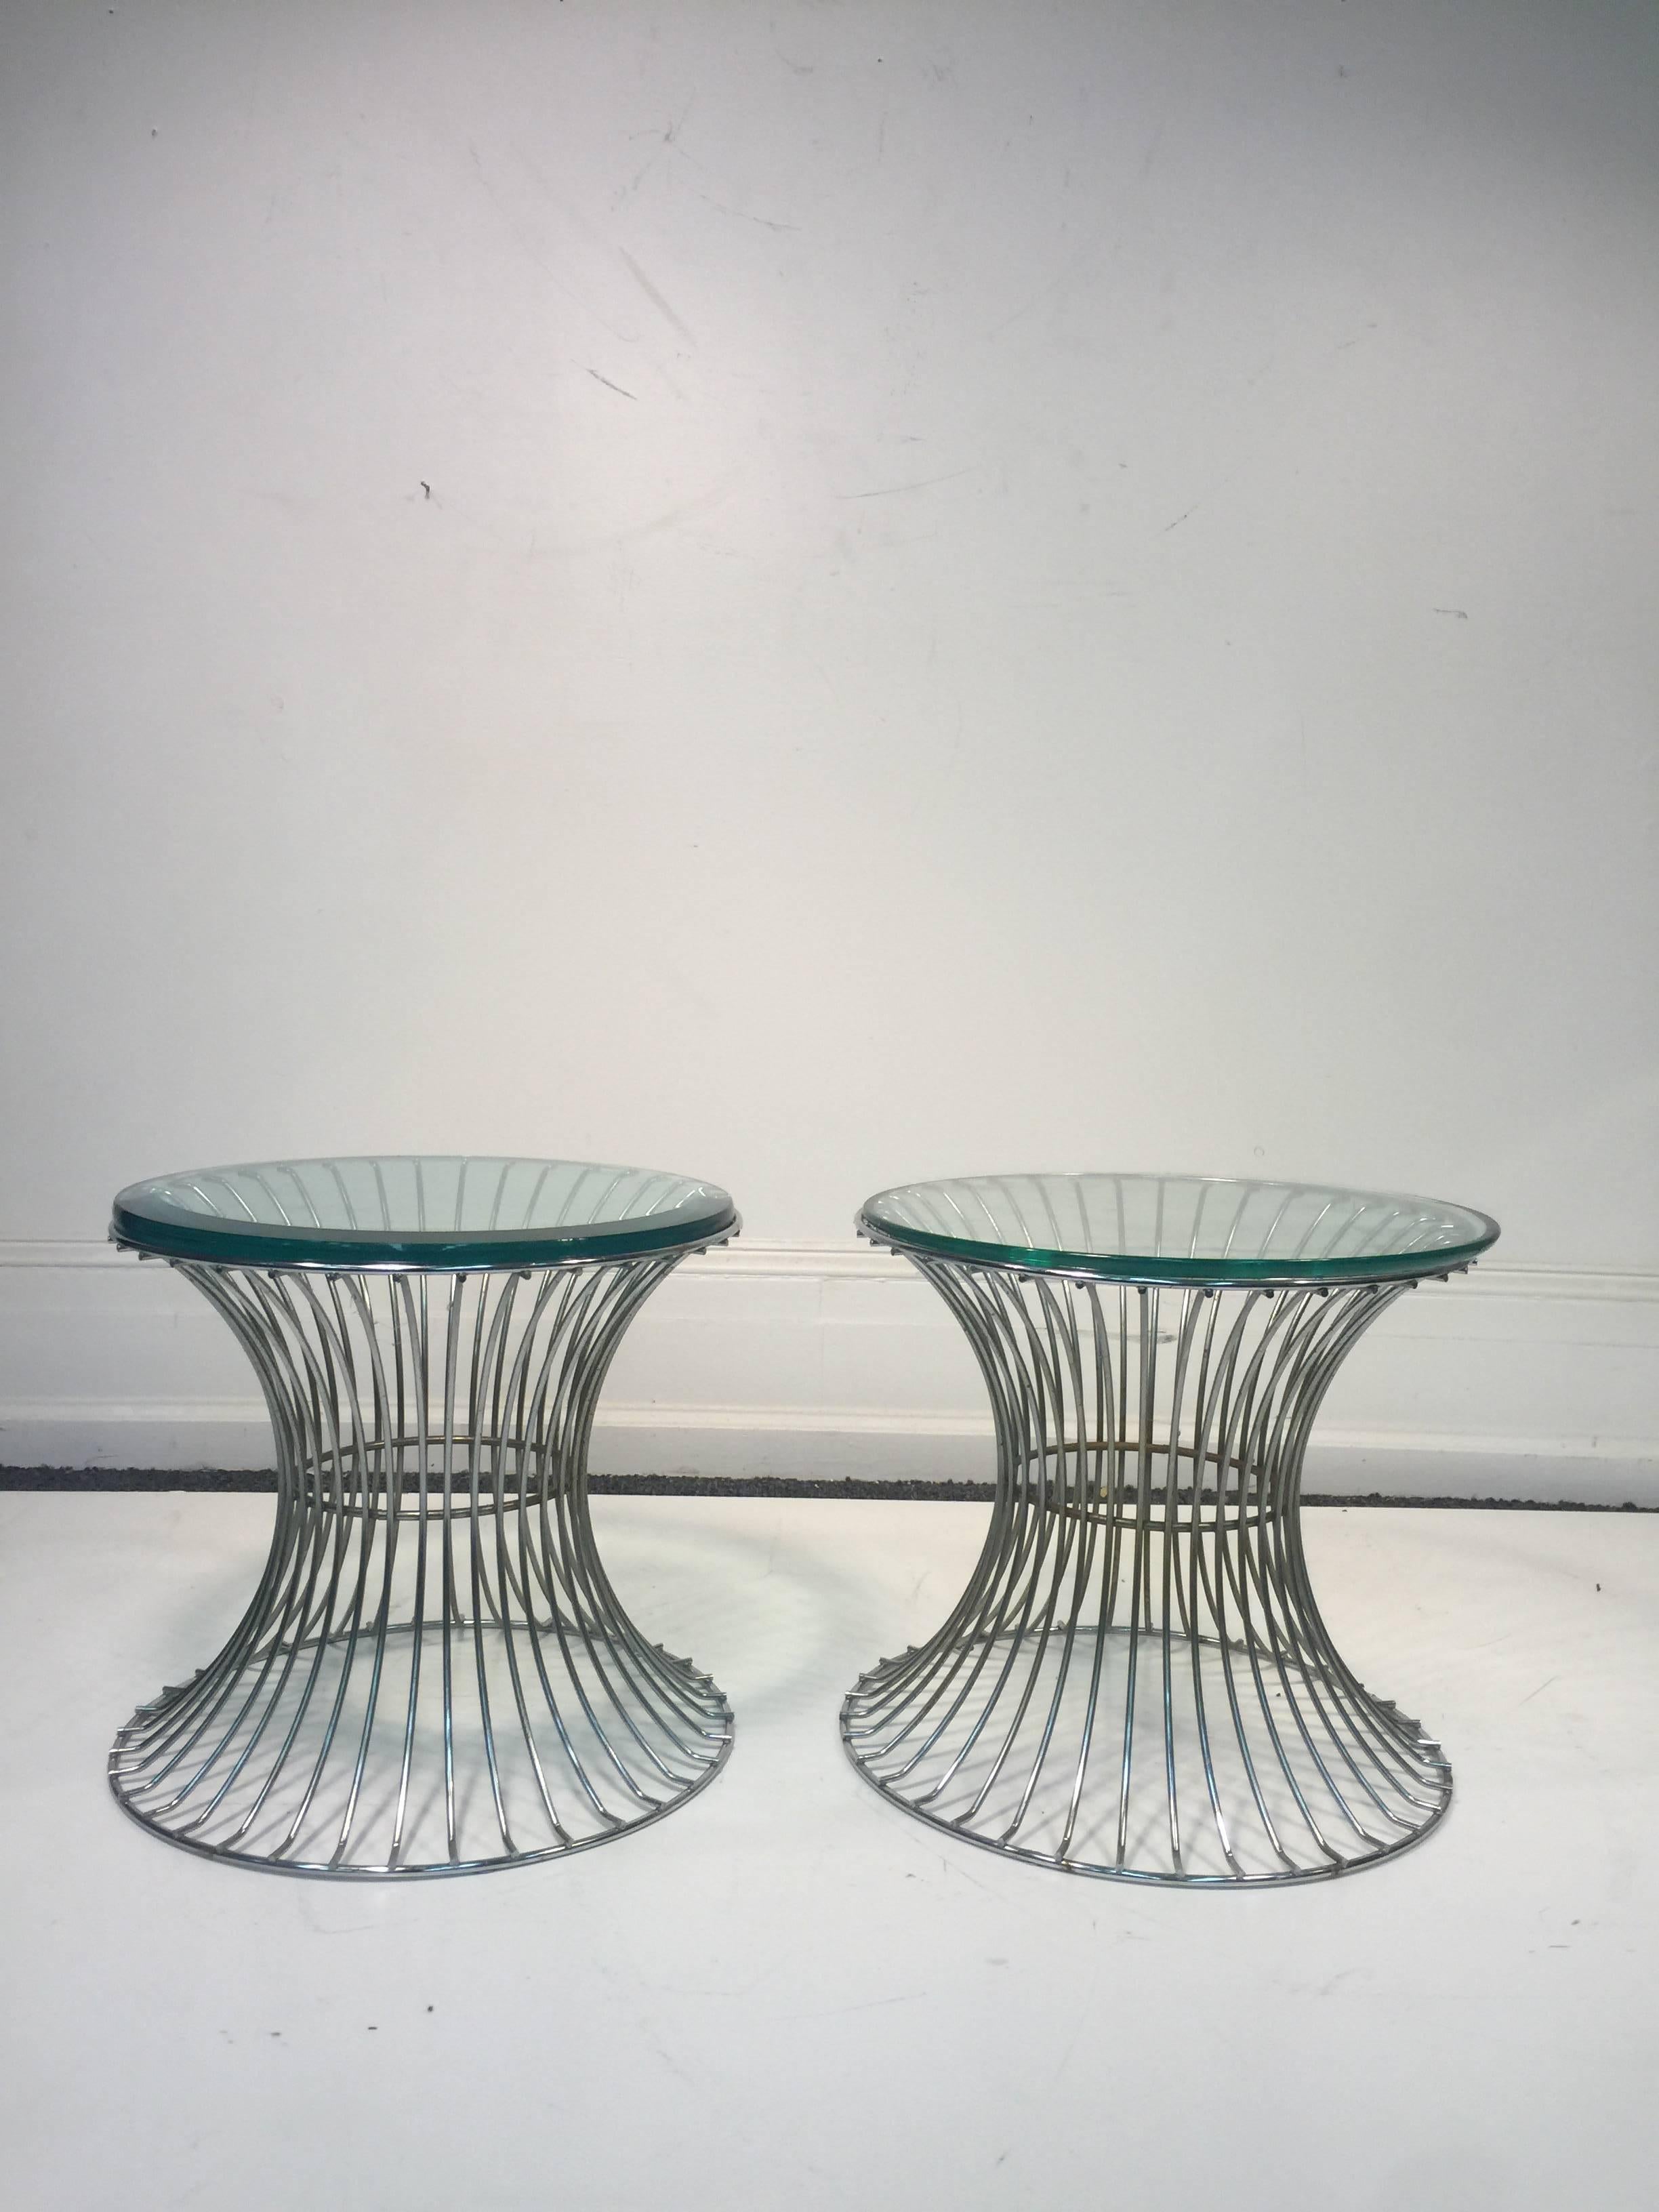 A wonderful pair of end or side tables with trumpeting wire bases by Warren Platner for Knoll. Unusual size, circa 1960. Good condition with age appropriate wear.